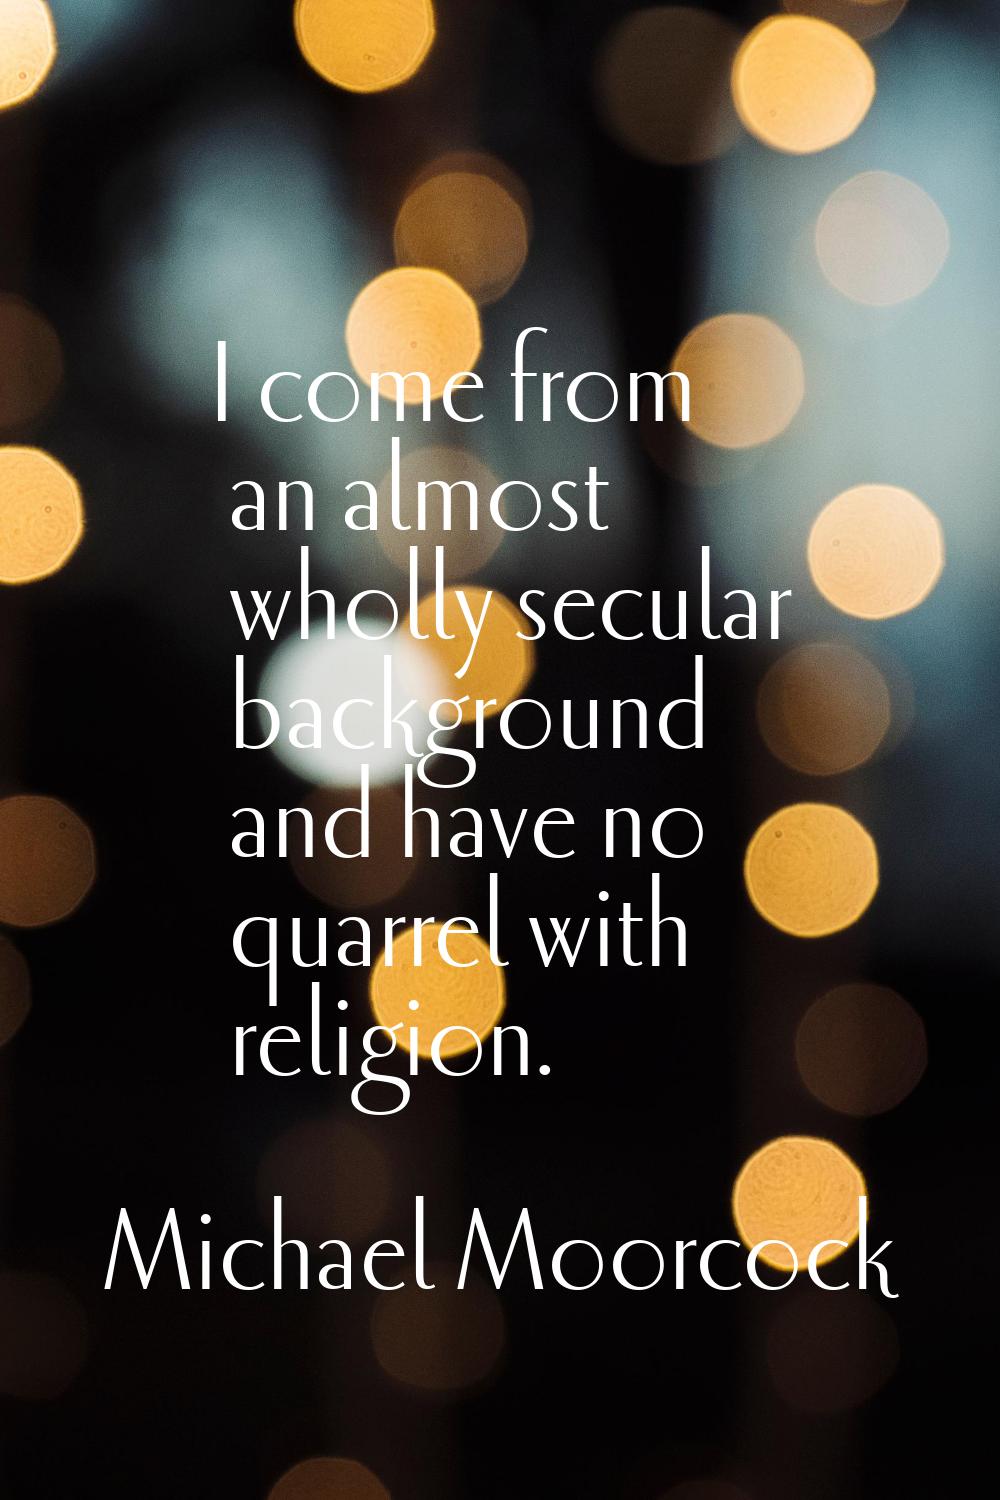 I come from an almost wholly secular background and have no quarrel with religion.